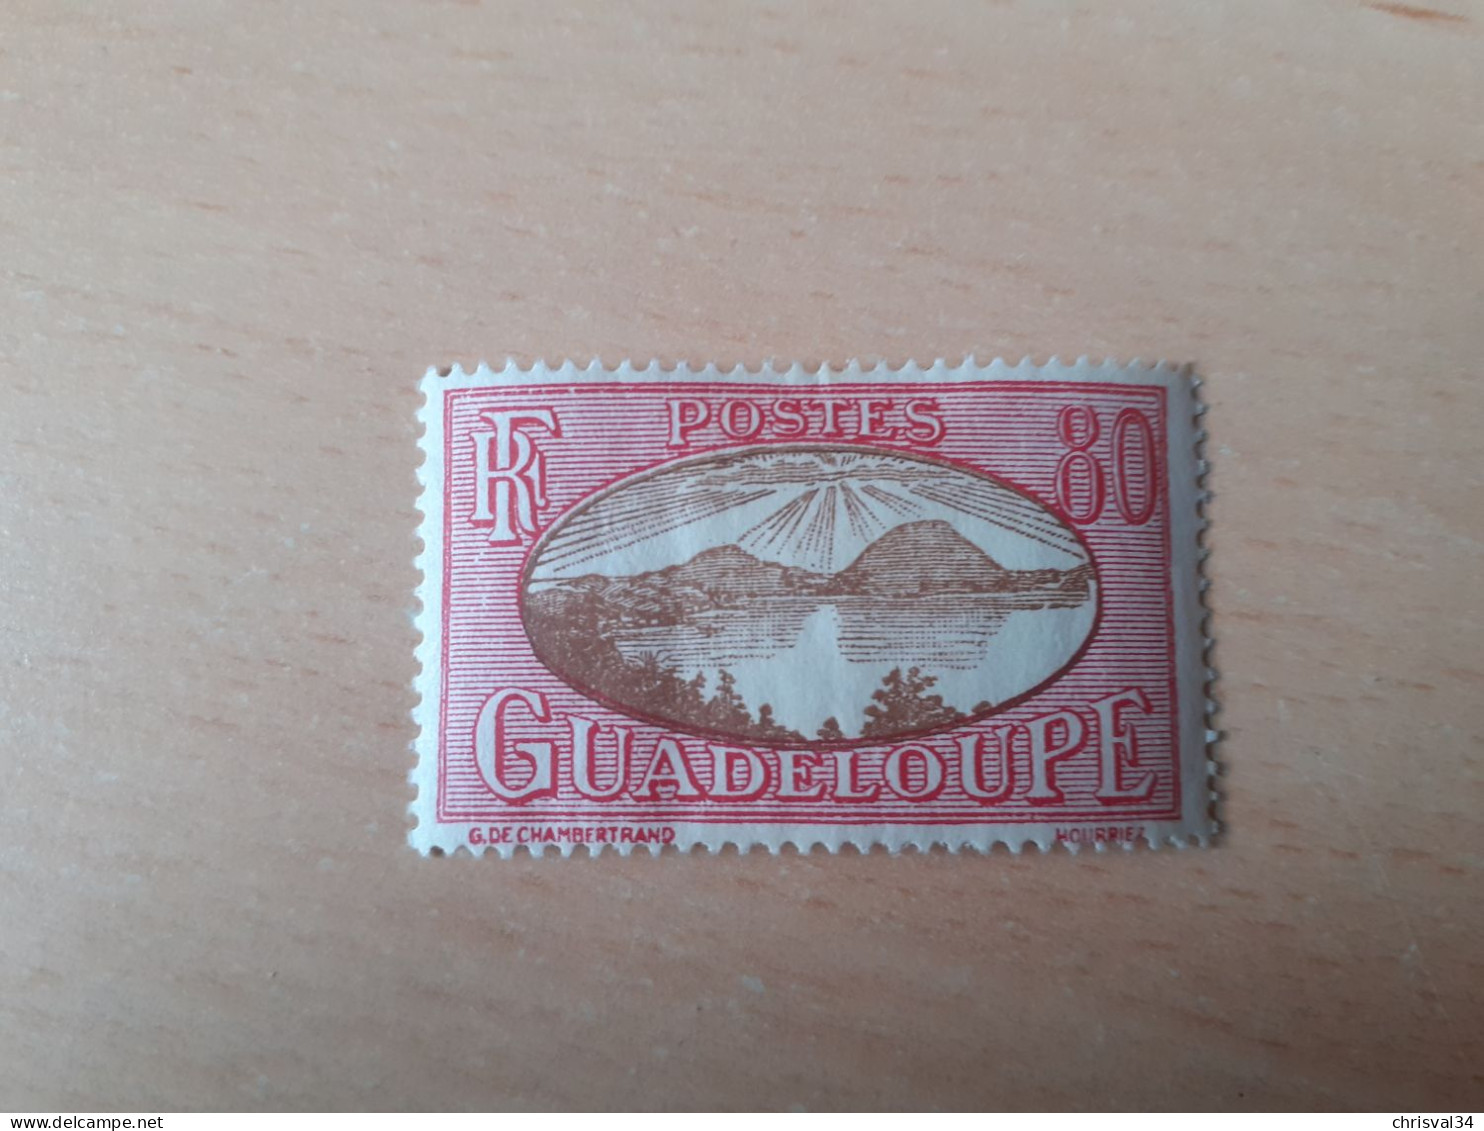 TIMBRE   GUADELOUPE       N  112A     COTE  1,00   EUROS  NEUF  TRACE  CHARNIERE - Ongebruikt